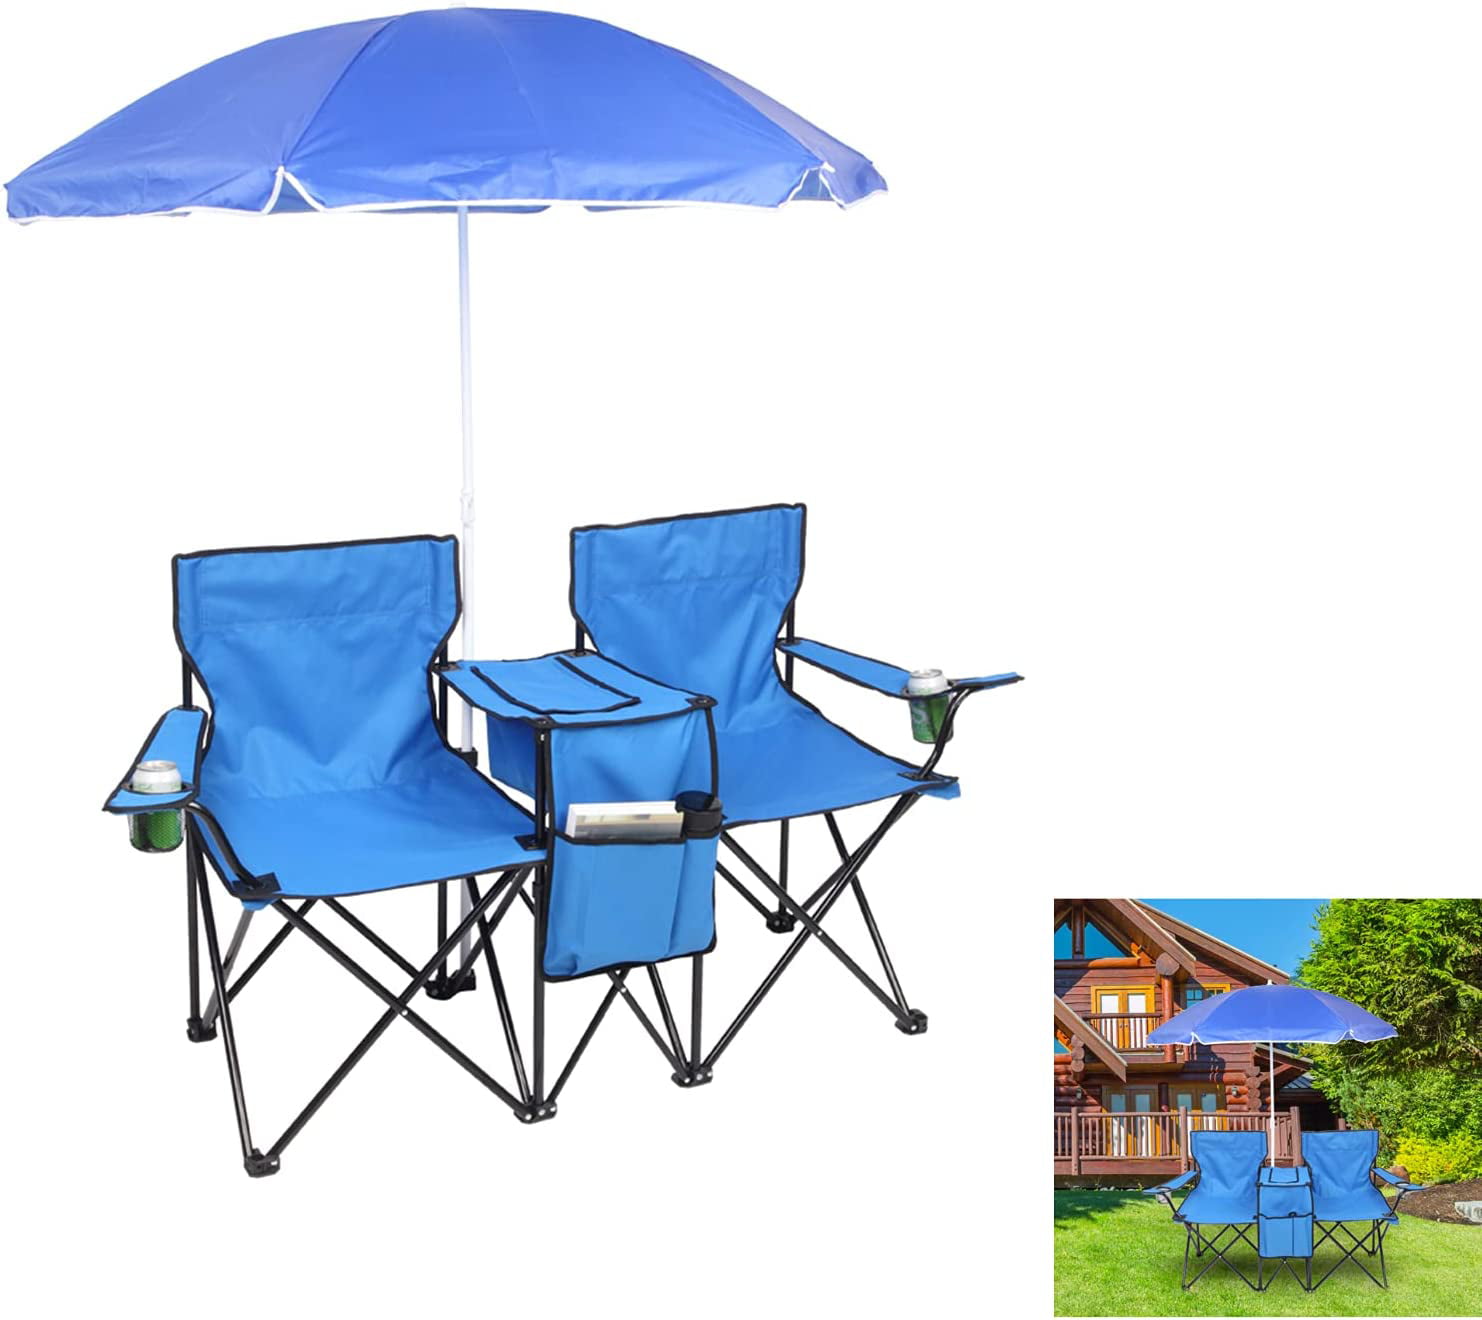 Picnic Double Folding Table Chair With Umbrella Table Cooler Fold Up Beach Chair 